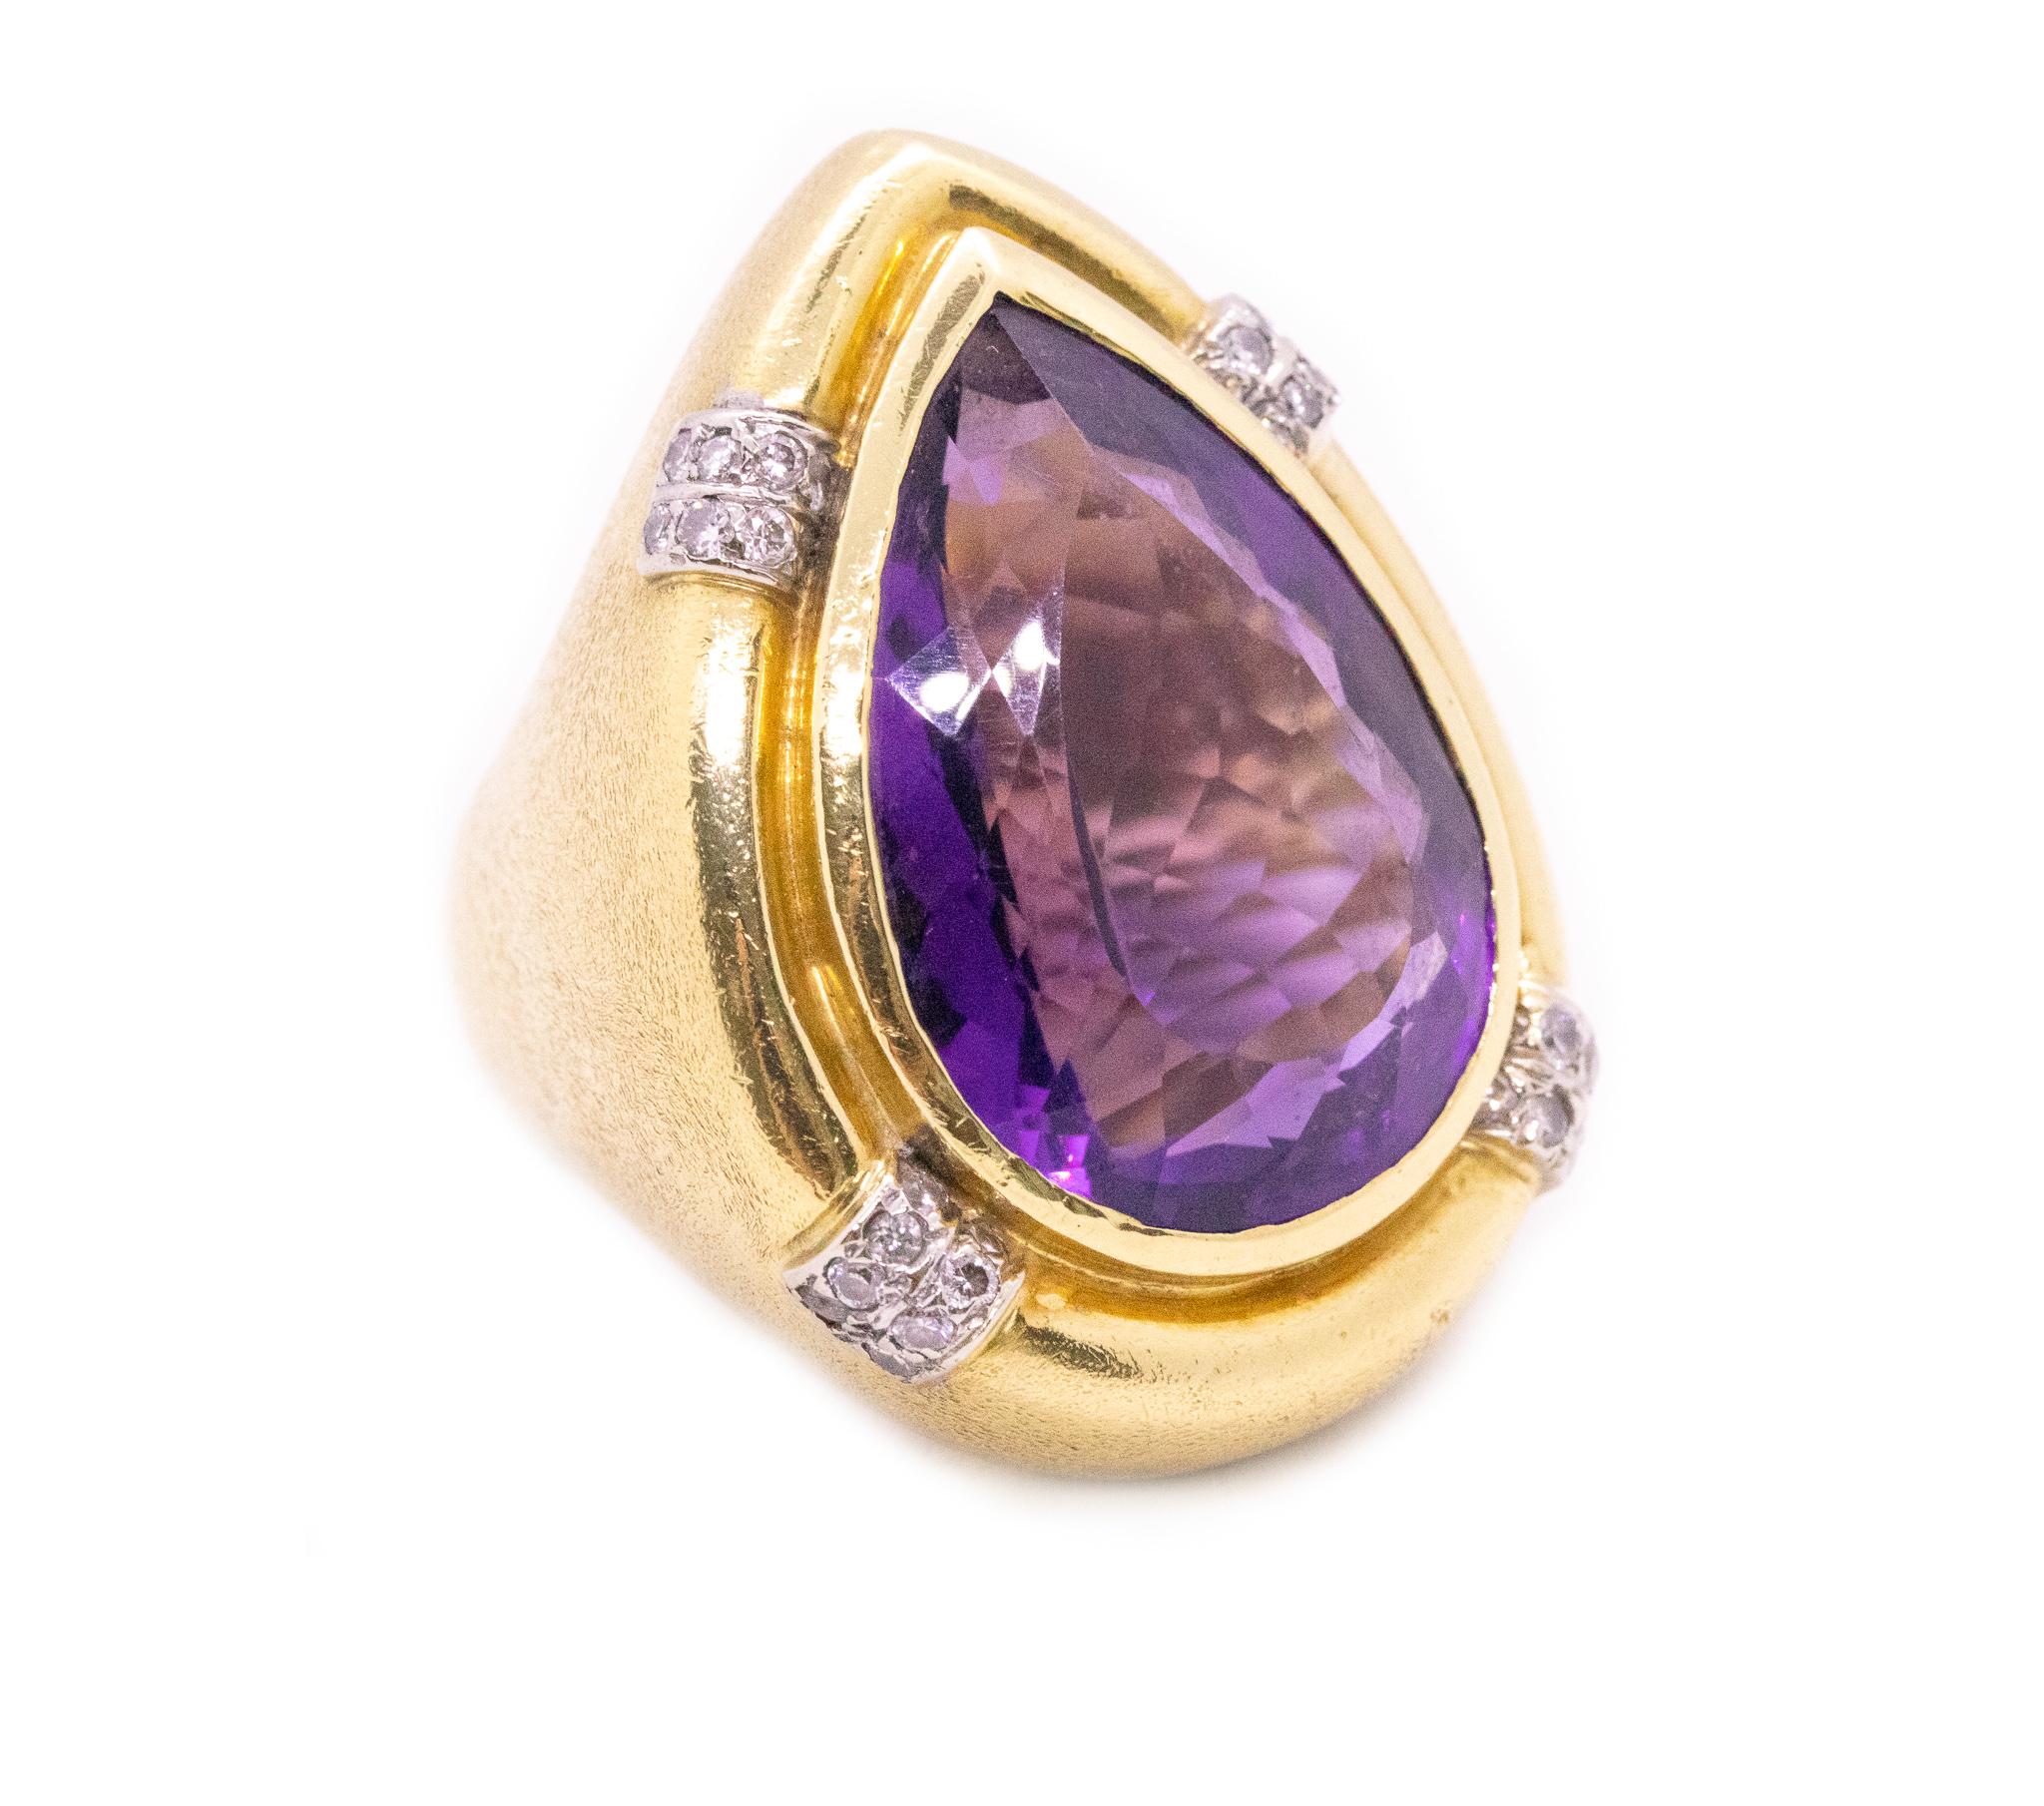 An over-sized jeweled cocktail ring.

Surely a one-of-a-kind custom made piece, created in the early 1970's period. It was crafted, with a massive huge look in solid yellow gold of 18 karats, with textured hammered surfaces and white gold accents